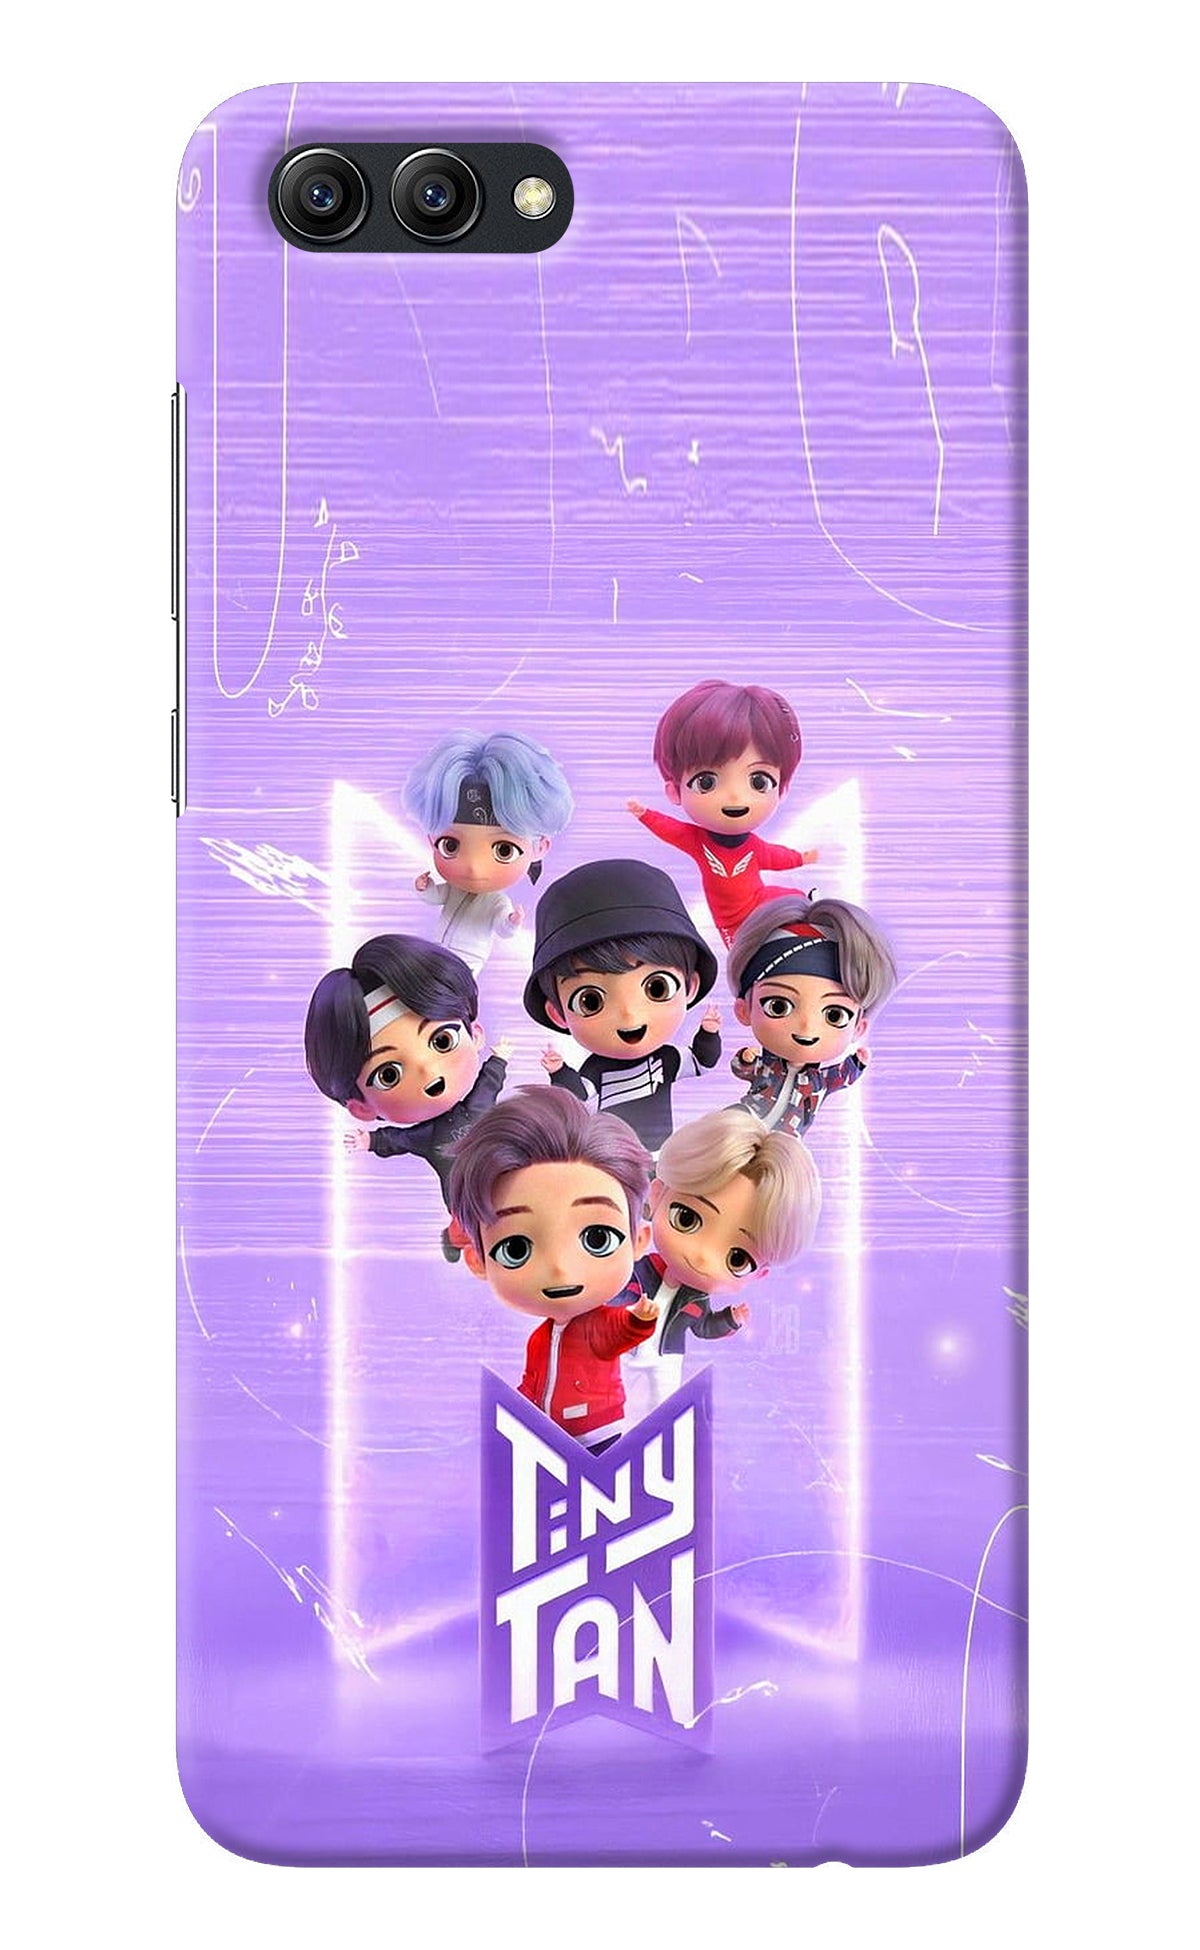 BTS Tiny Tan Honor View 10 Back Cover